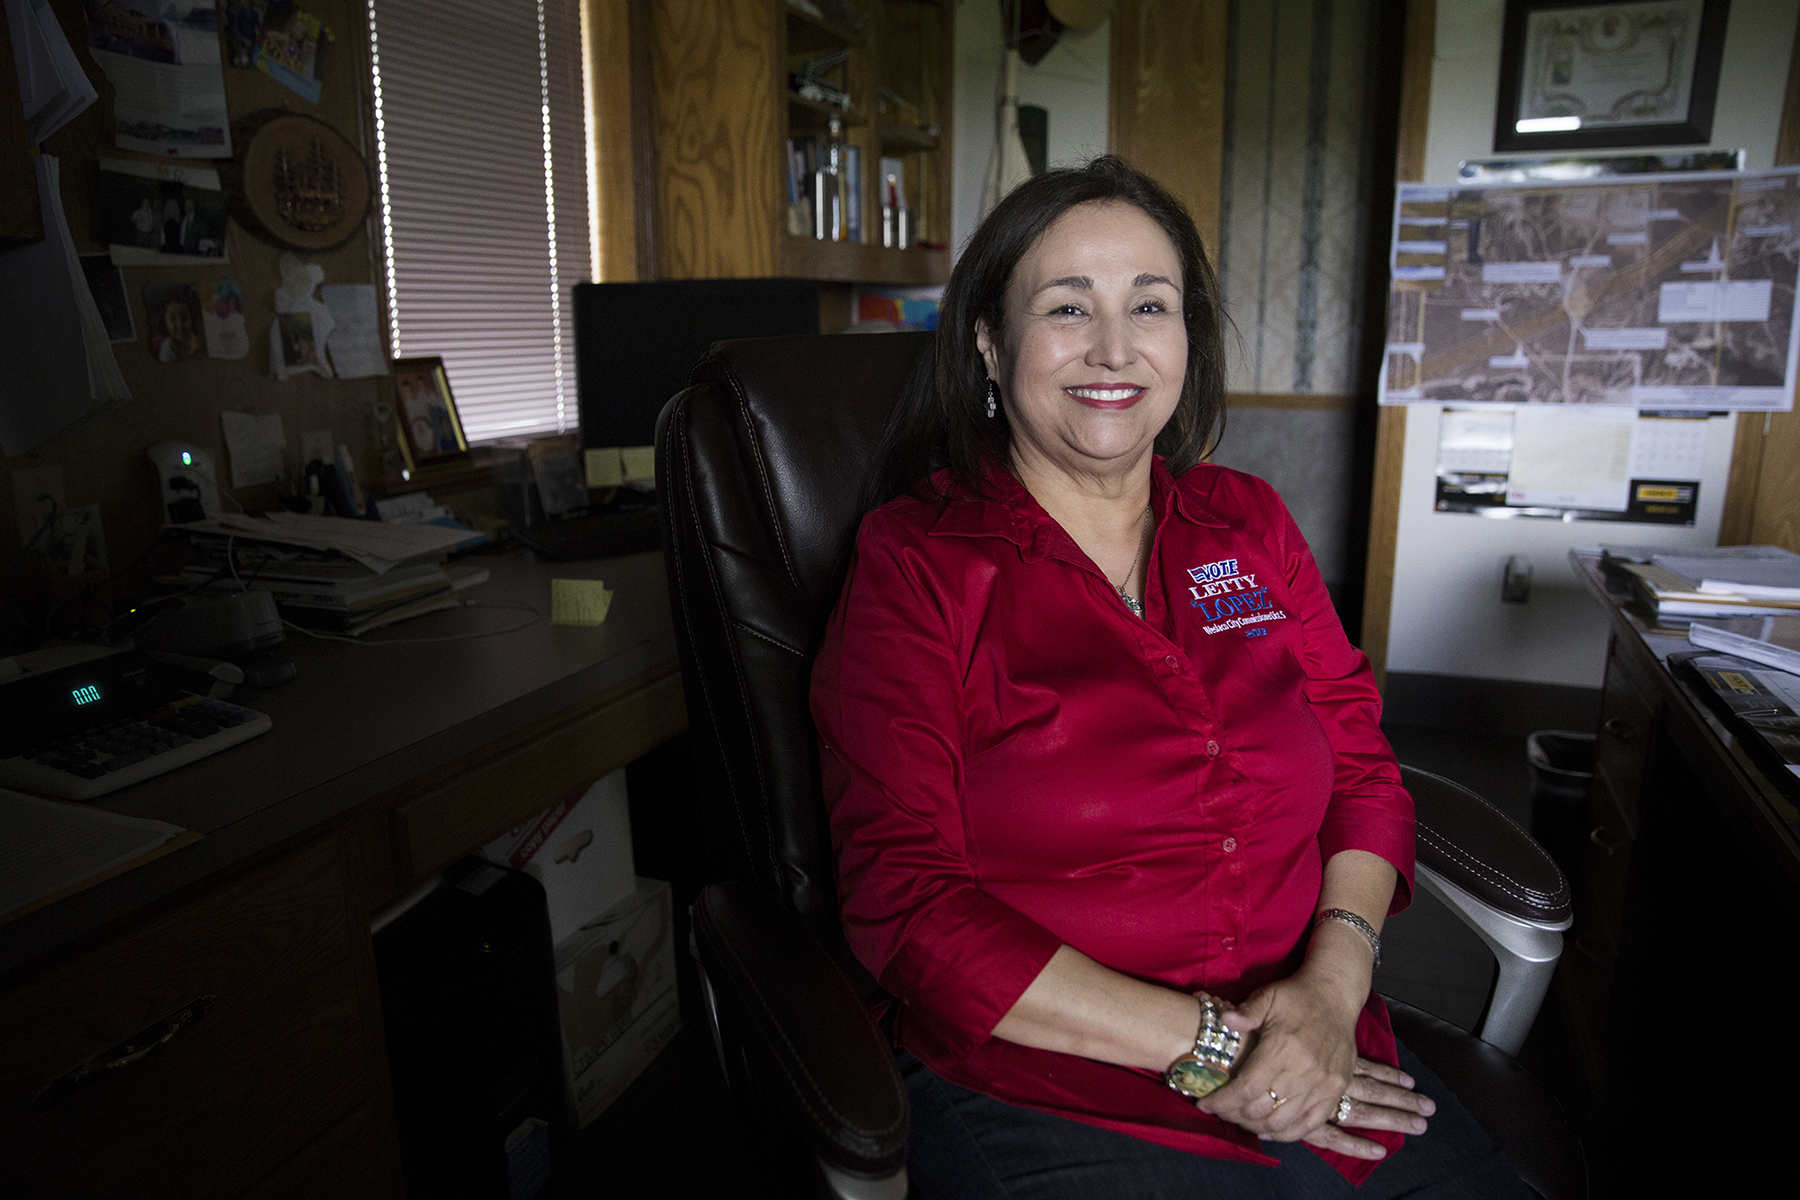 Letty Lopez, a city commissioner in Weslaco, Texas, poses for a portrait in her office. Although she originally ran for commissioner in November 2013, it wasn’t until a special election two years later that she could take the position. Lopez contested the 2013 election after falling short by 16 votes. She discovered elderly citizens had not filled out their mail-in ballots on their own. (Pinar Istek/News21)